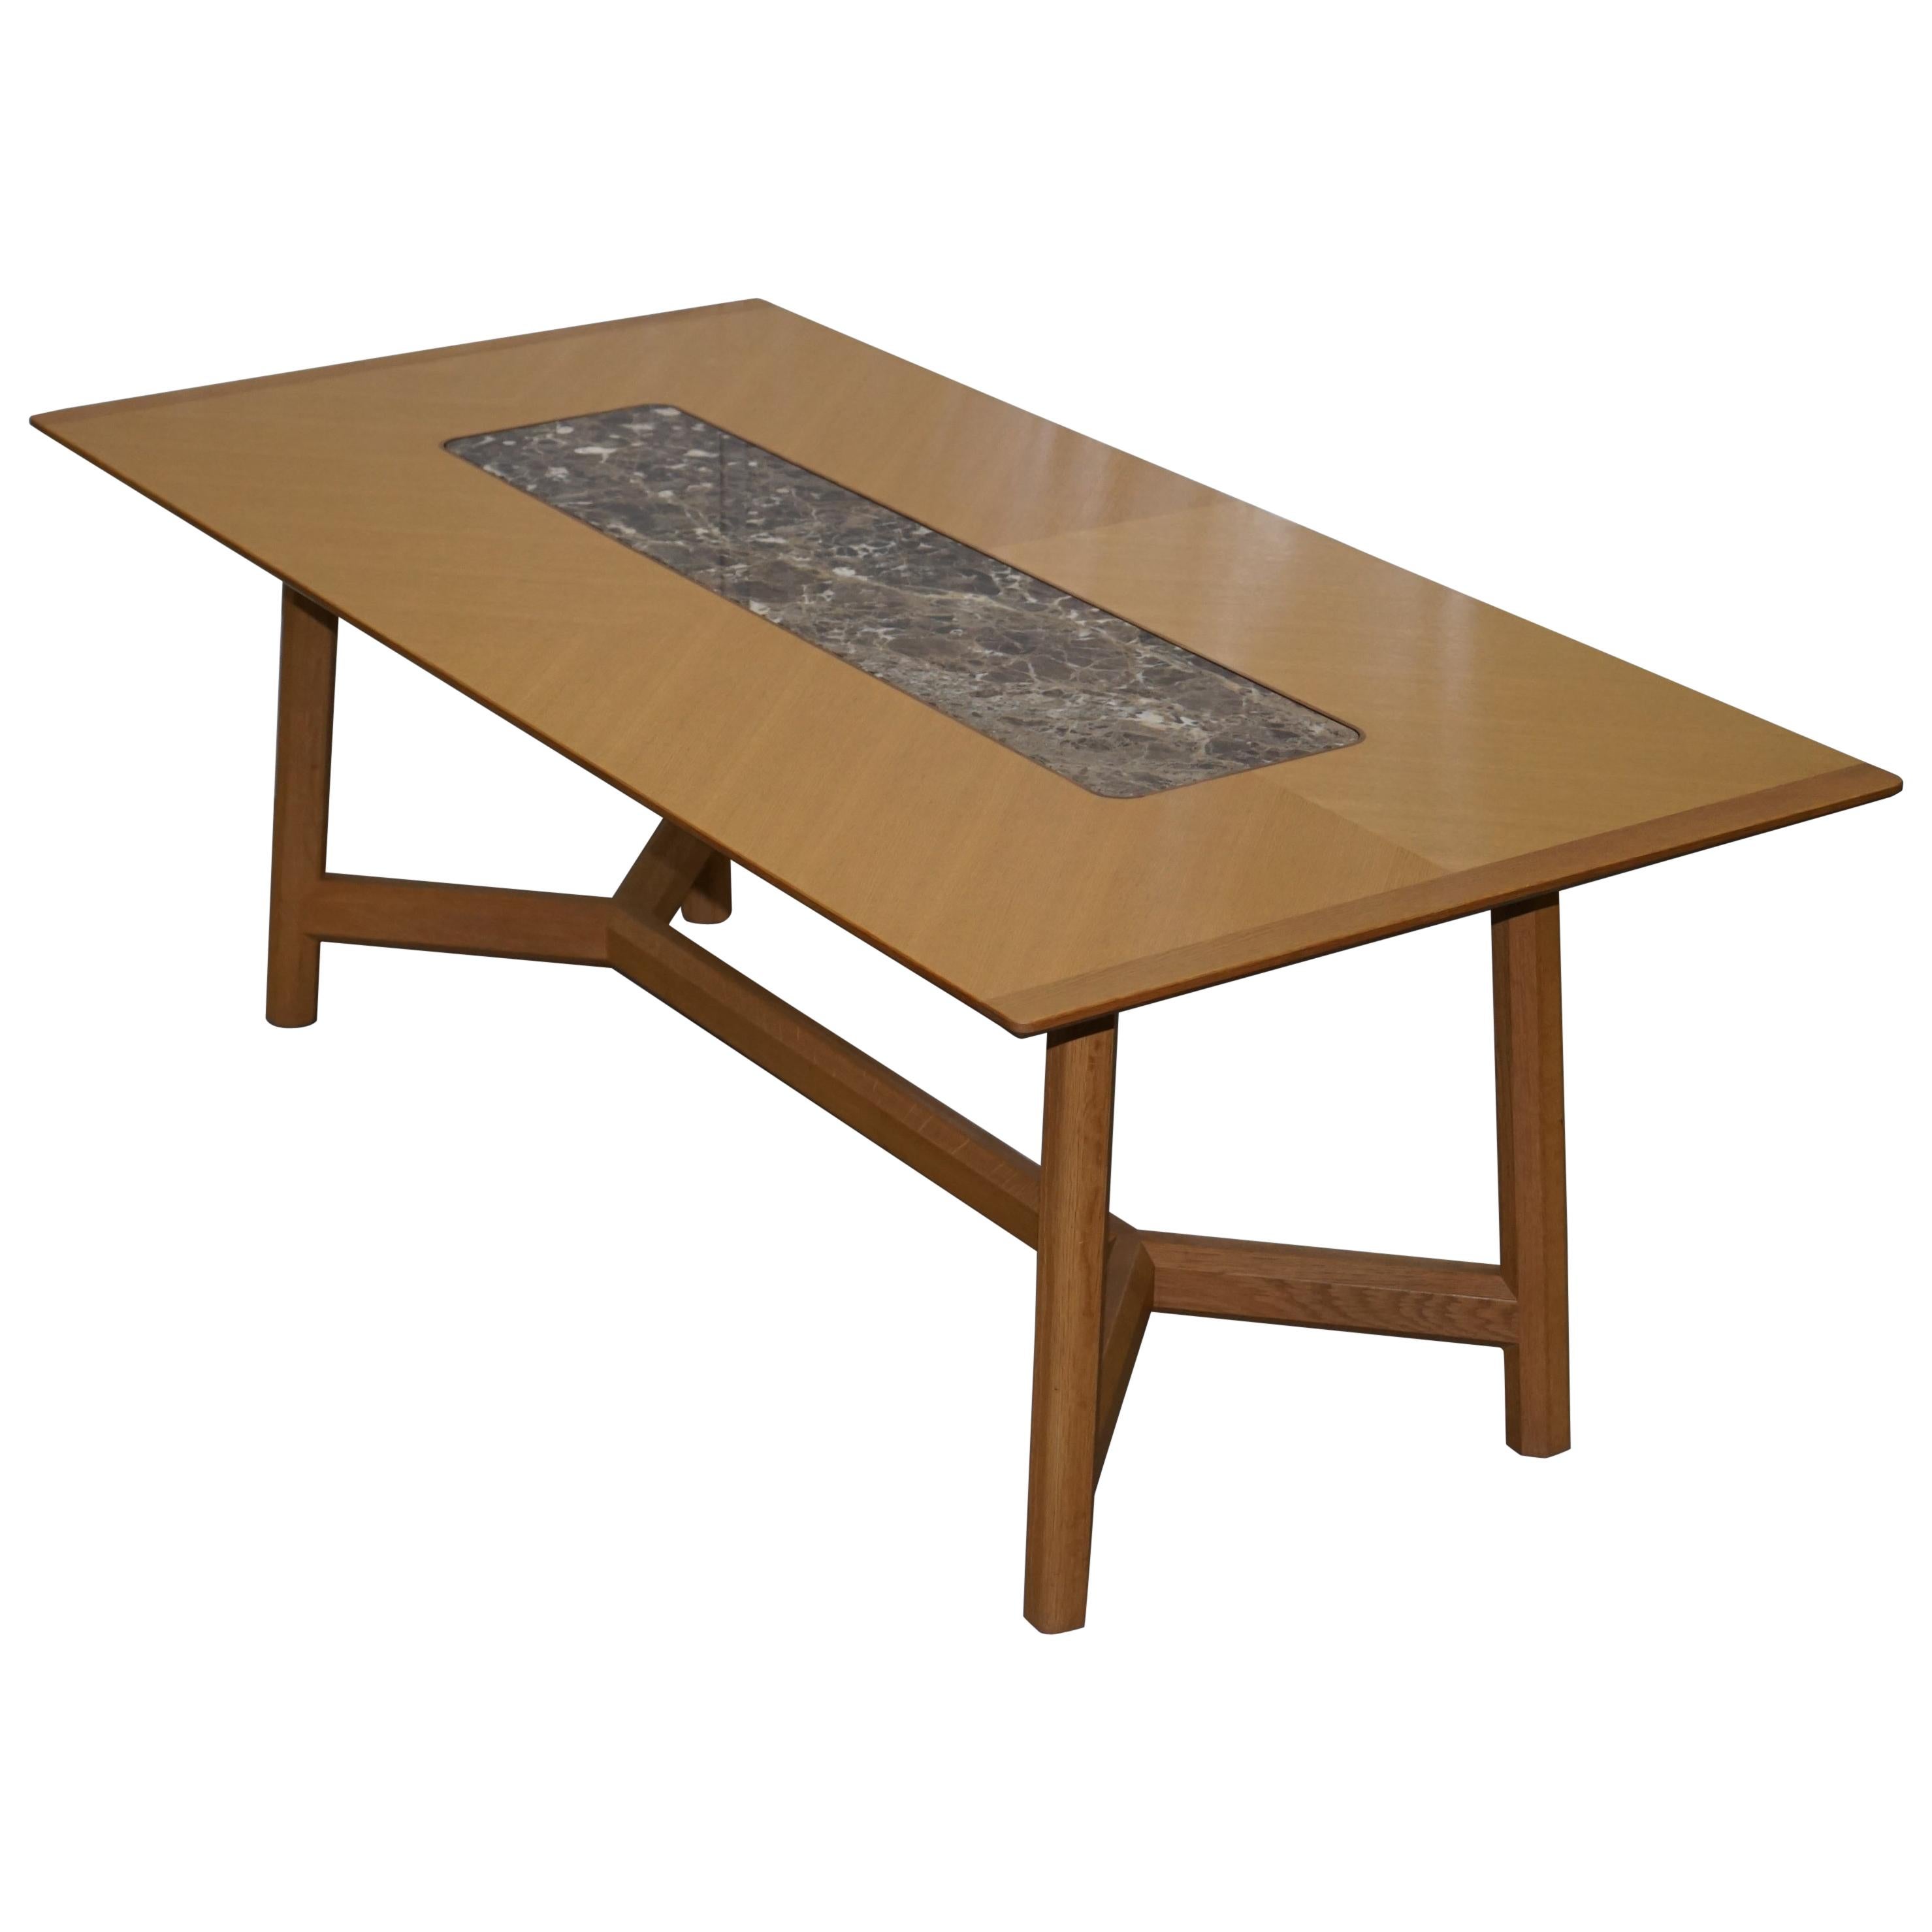 David Linley Newlyn Sycamore Wood and Marble Hayrake Dining Table For Sale